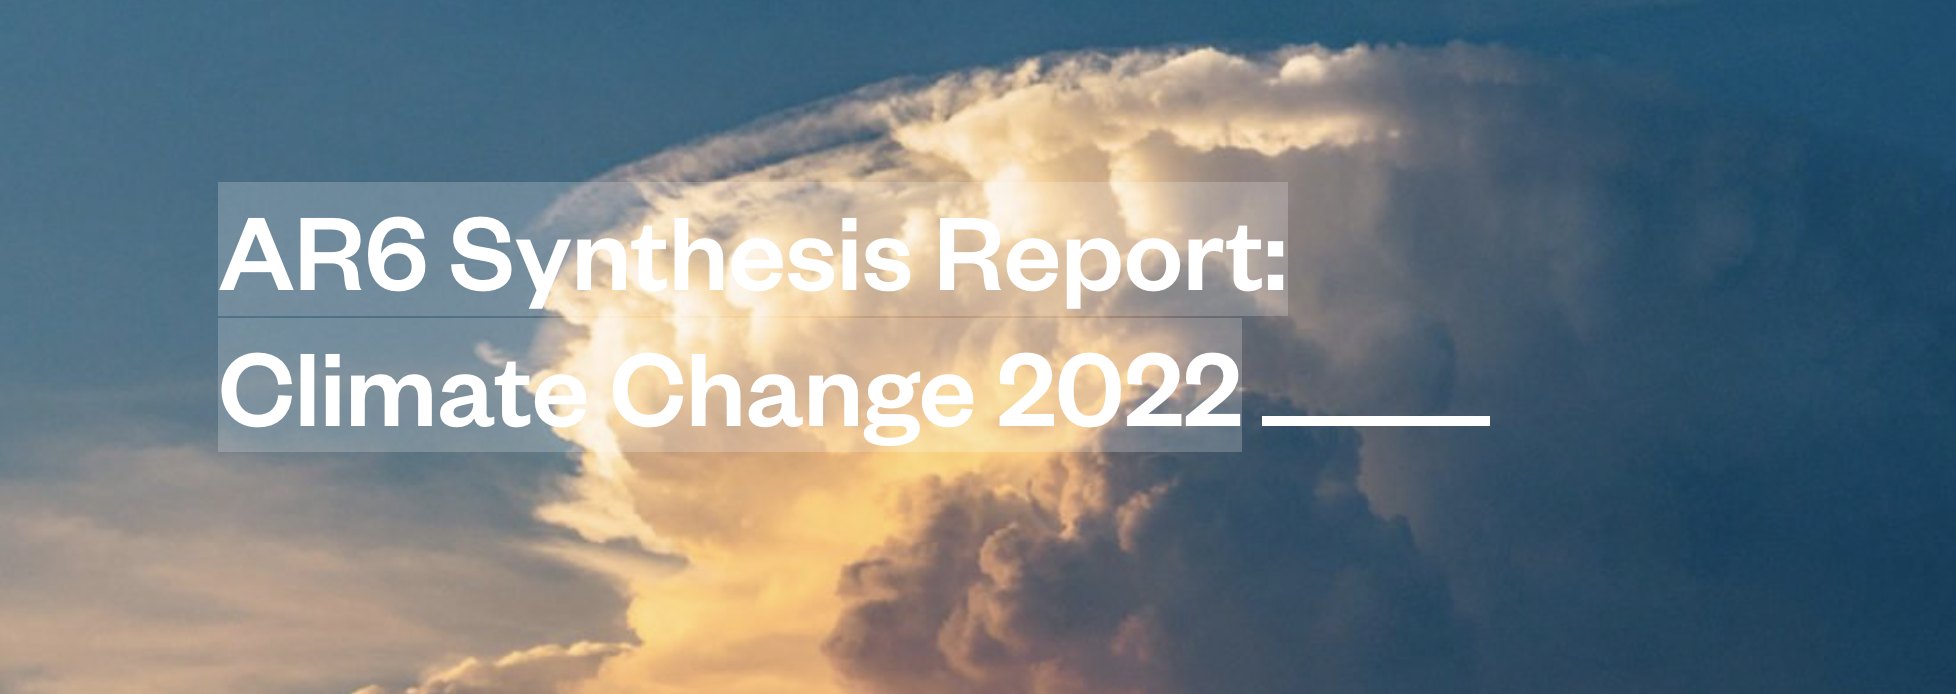 AR6 Synthesis Report: Climate Change 2022